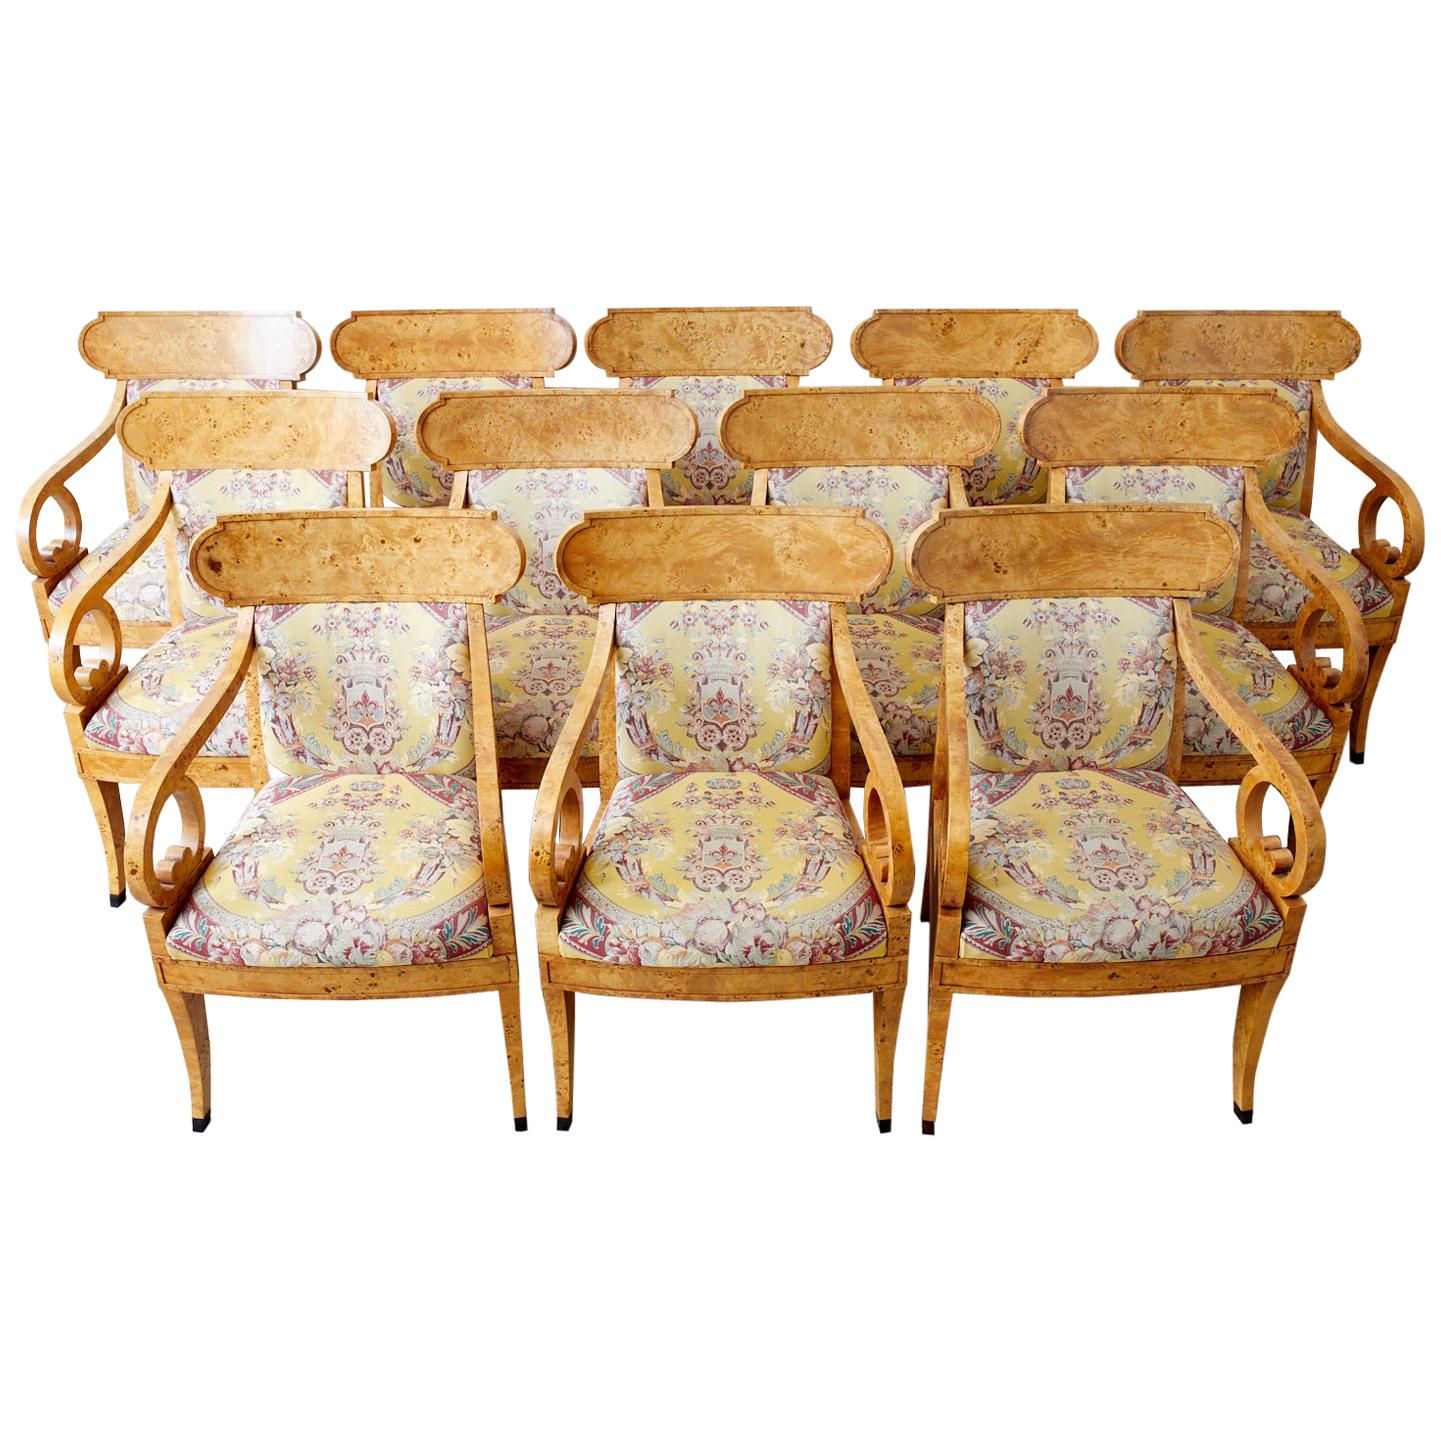 Magnificent set of twelve English Regency style klismos armchairs or dining chairs made by Baker Furniture. Featuring handcrafted frames covered with dramatic burlwood veneers. The klismos form curved backrest is conjoined by gracefully curved arms